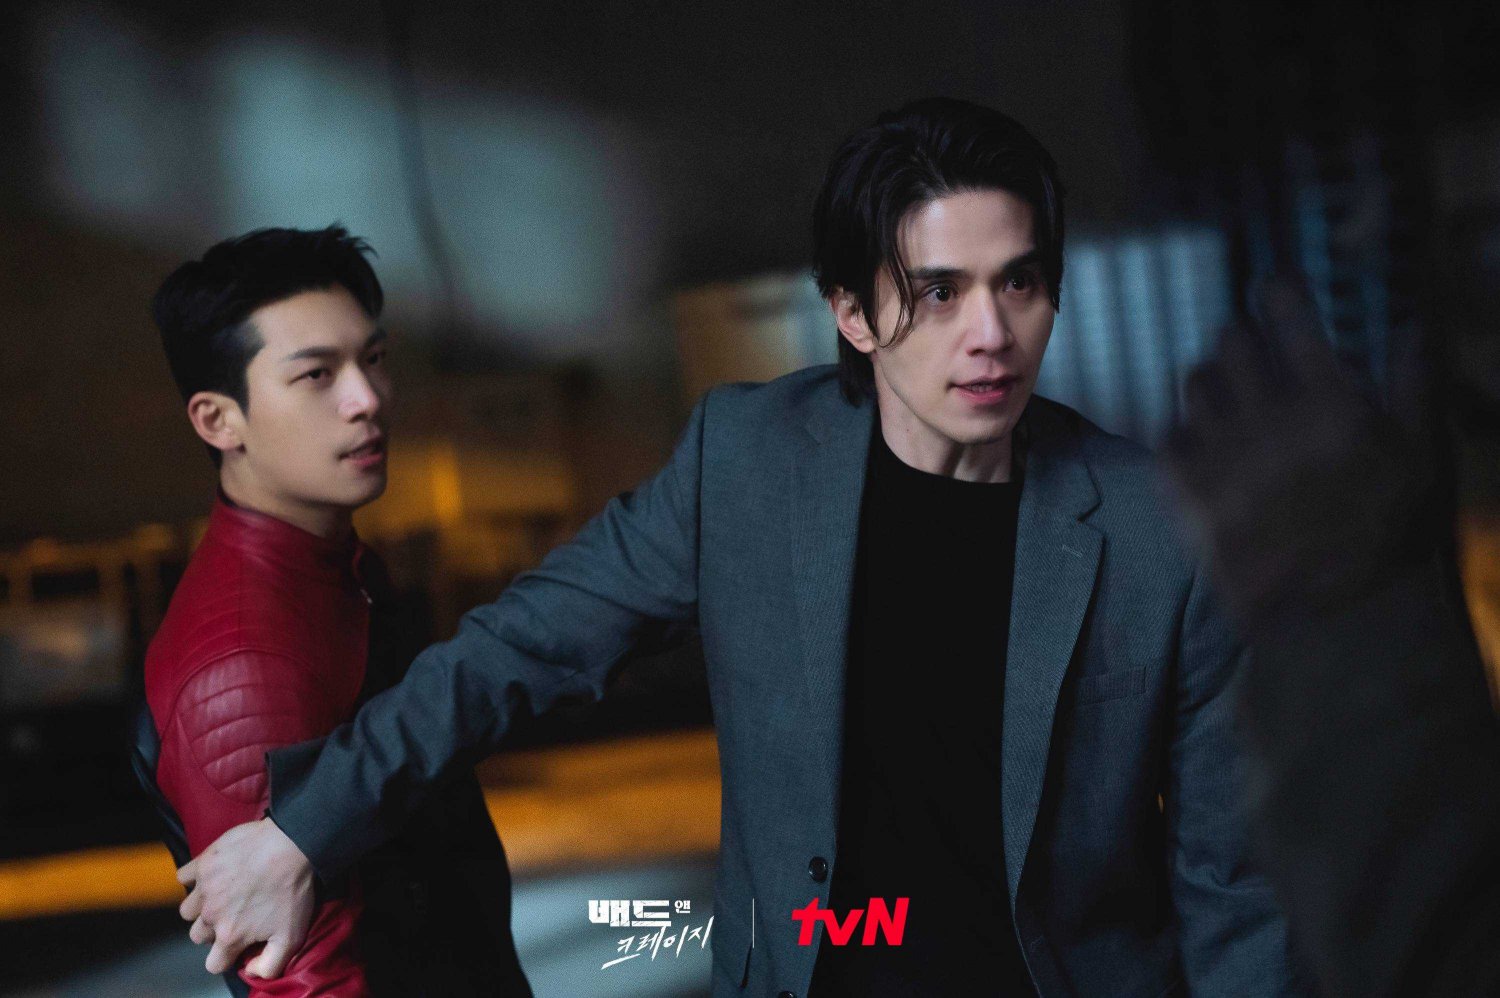 Photos New Stills and Behind the Scenes Image Added for the Korean Drama ' Bad and Crazy' HanCinema